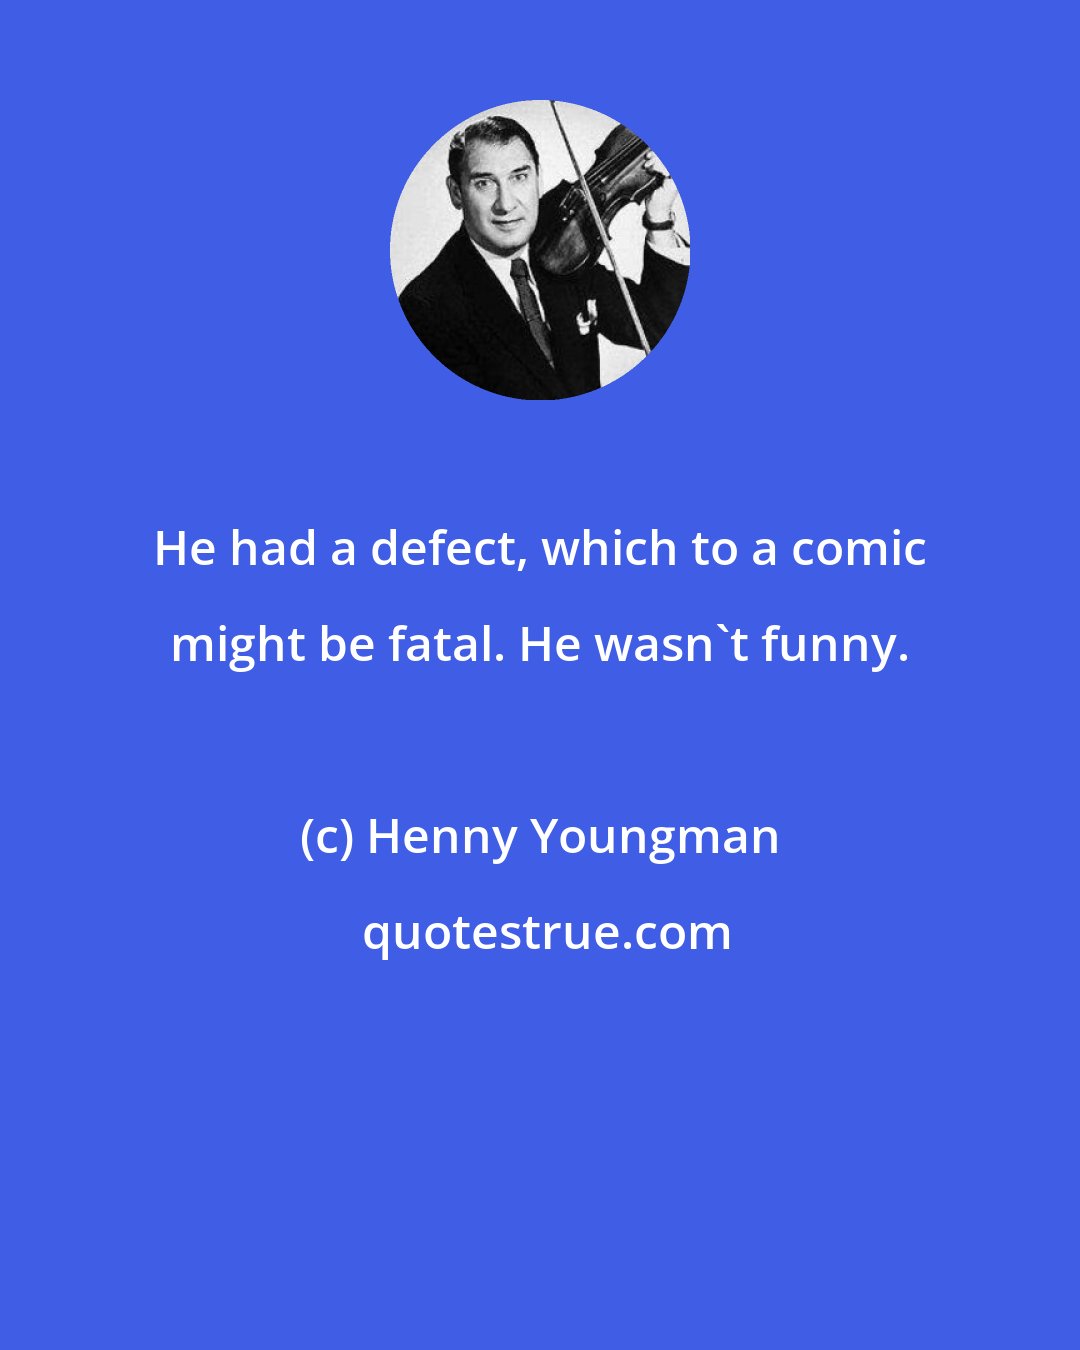 Henny Youngman: He had a defect, which to a comic might be fatal. He wasn't funny.